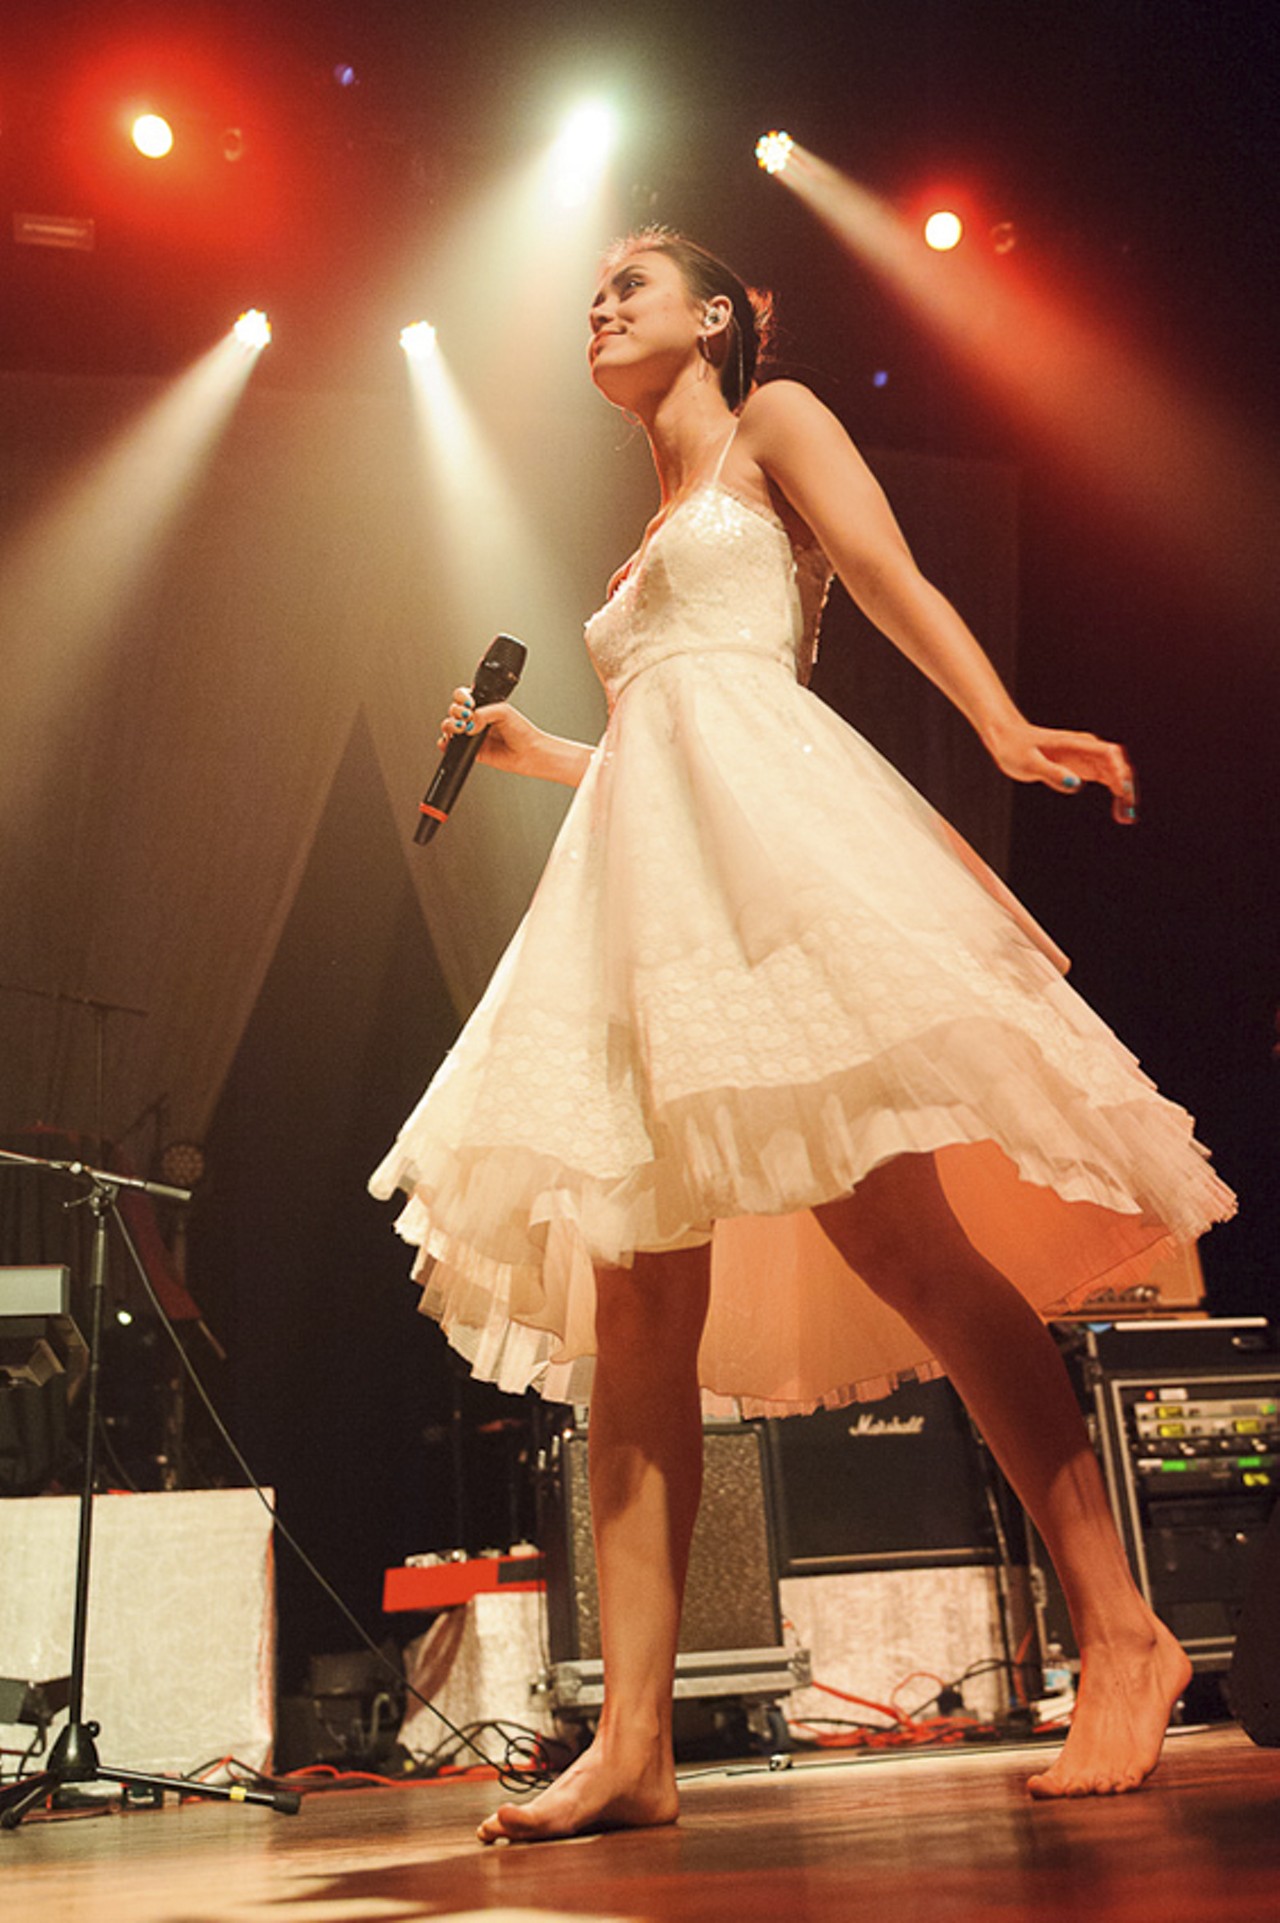 Dia Frampton, former contestant on the talent show The Voice, performing in support of The Fray at the Pageant in St. Louis on May 8, 2012.